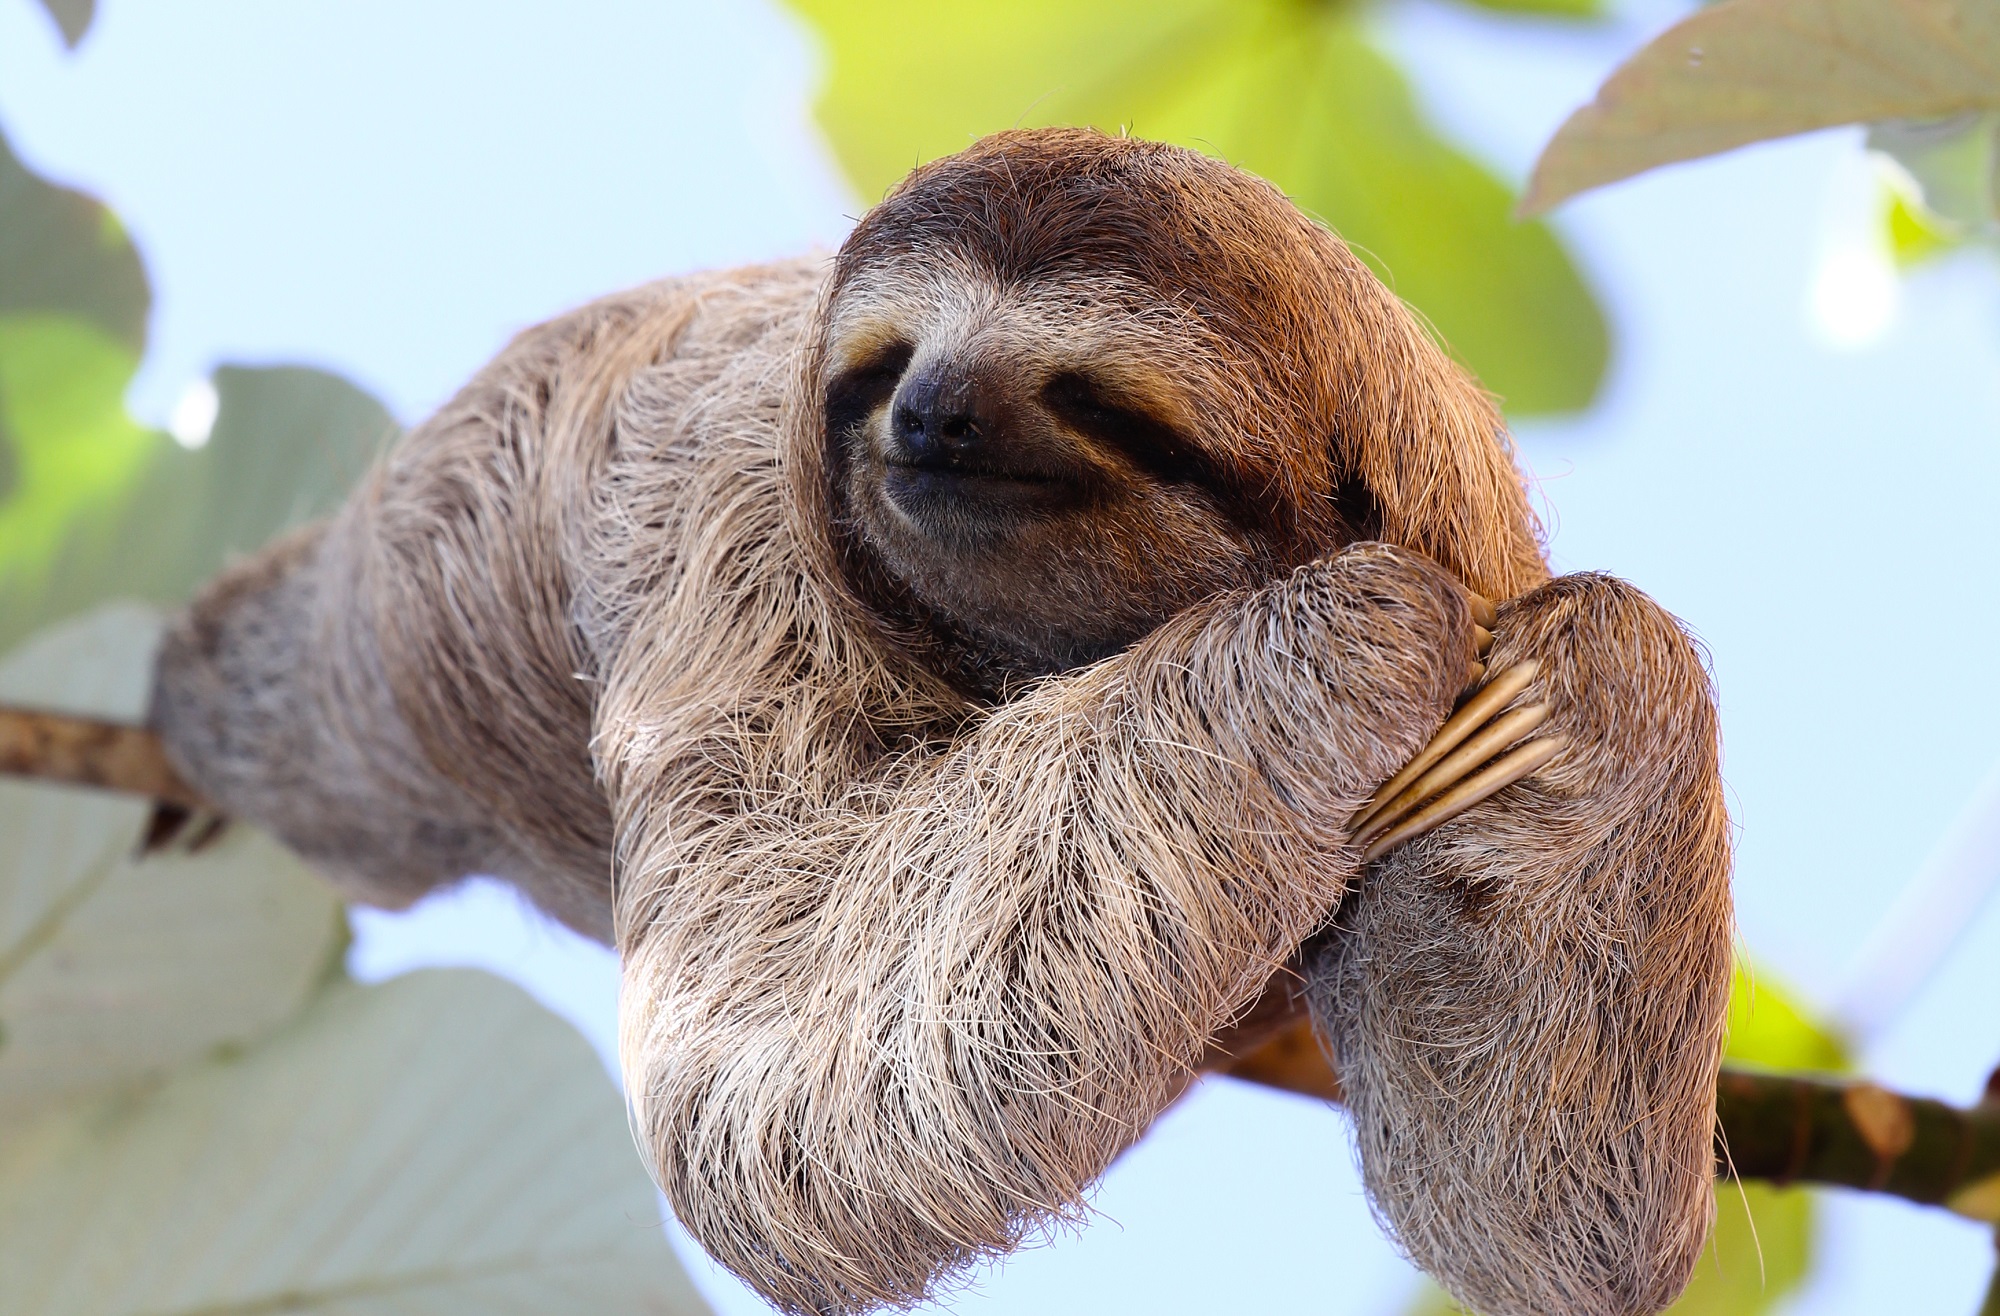 sloth hanging on a branch